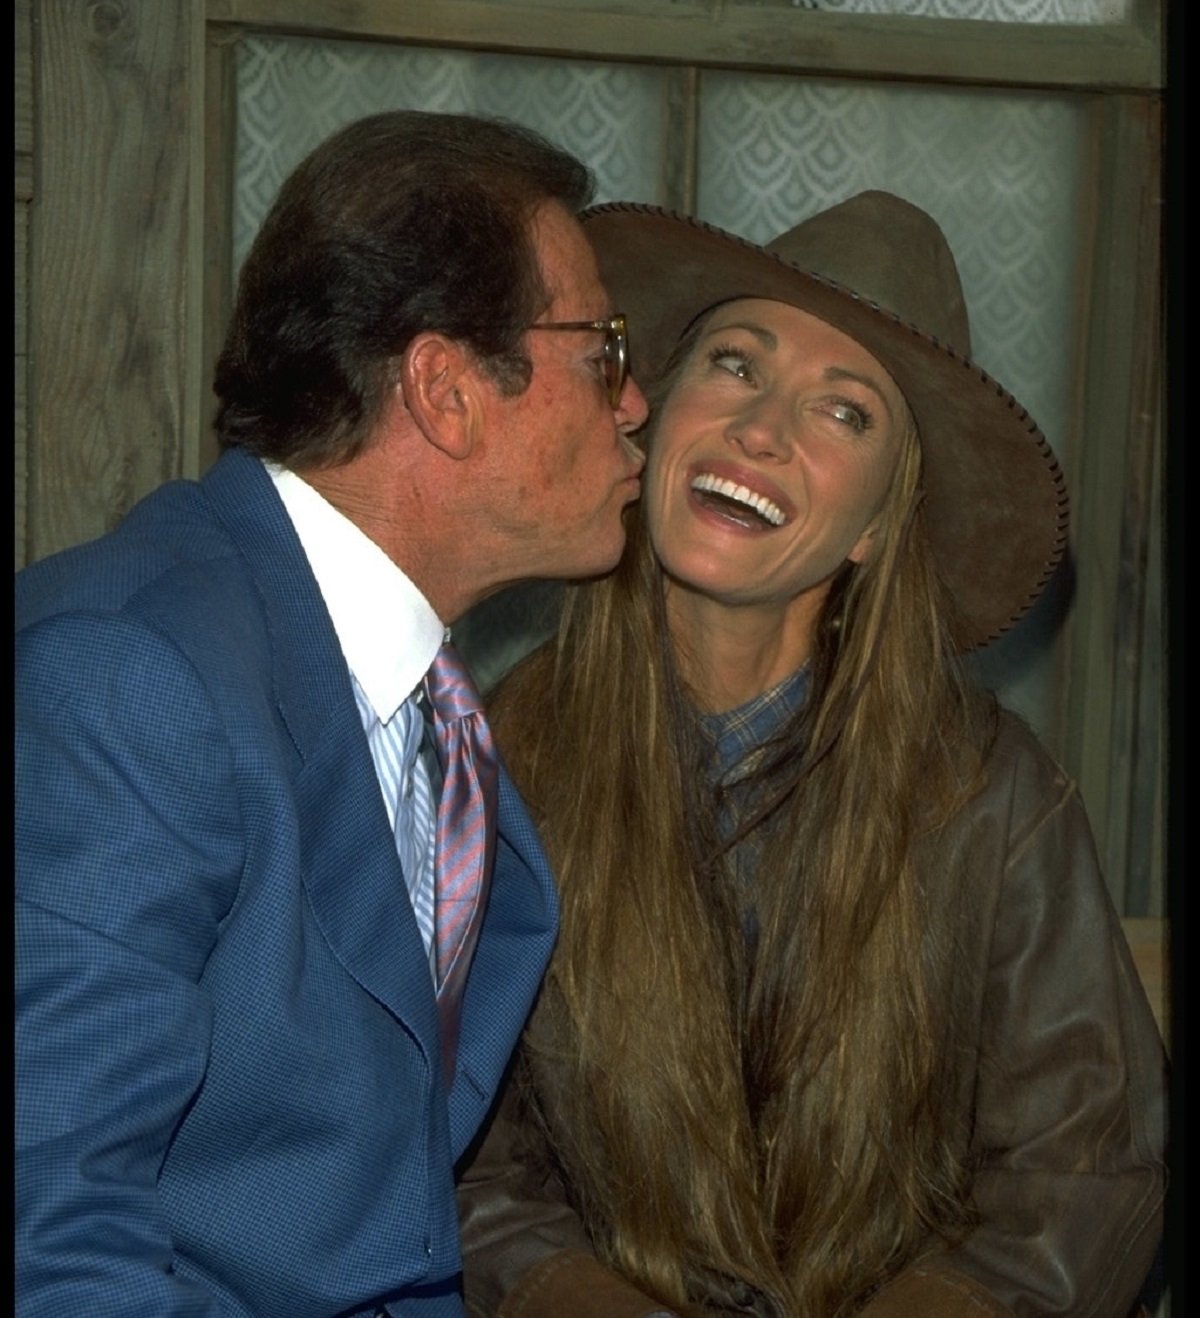 Roger Moore giving Jane Seymour a kiss on the cheek